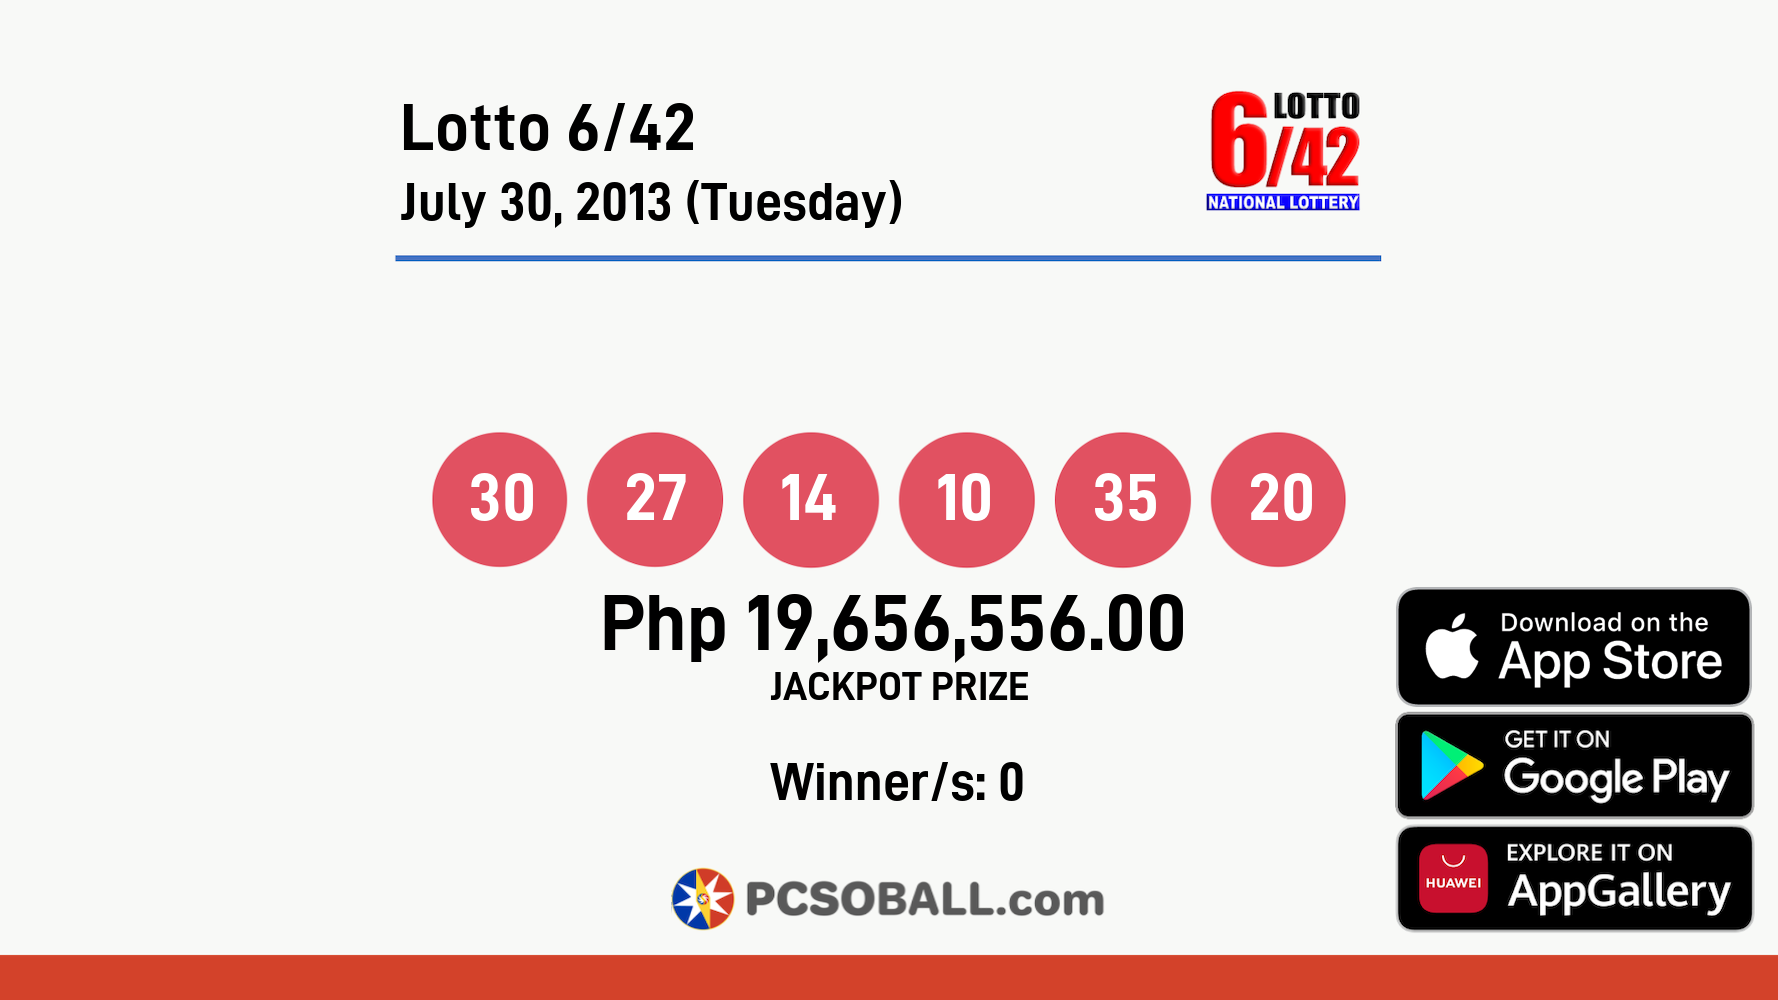 Lotto 6/42 July 30, 2013 (Tuesday) Result